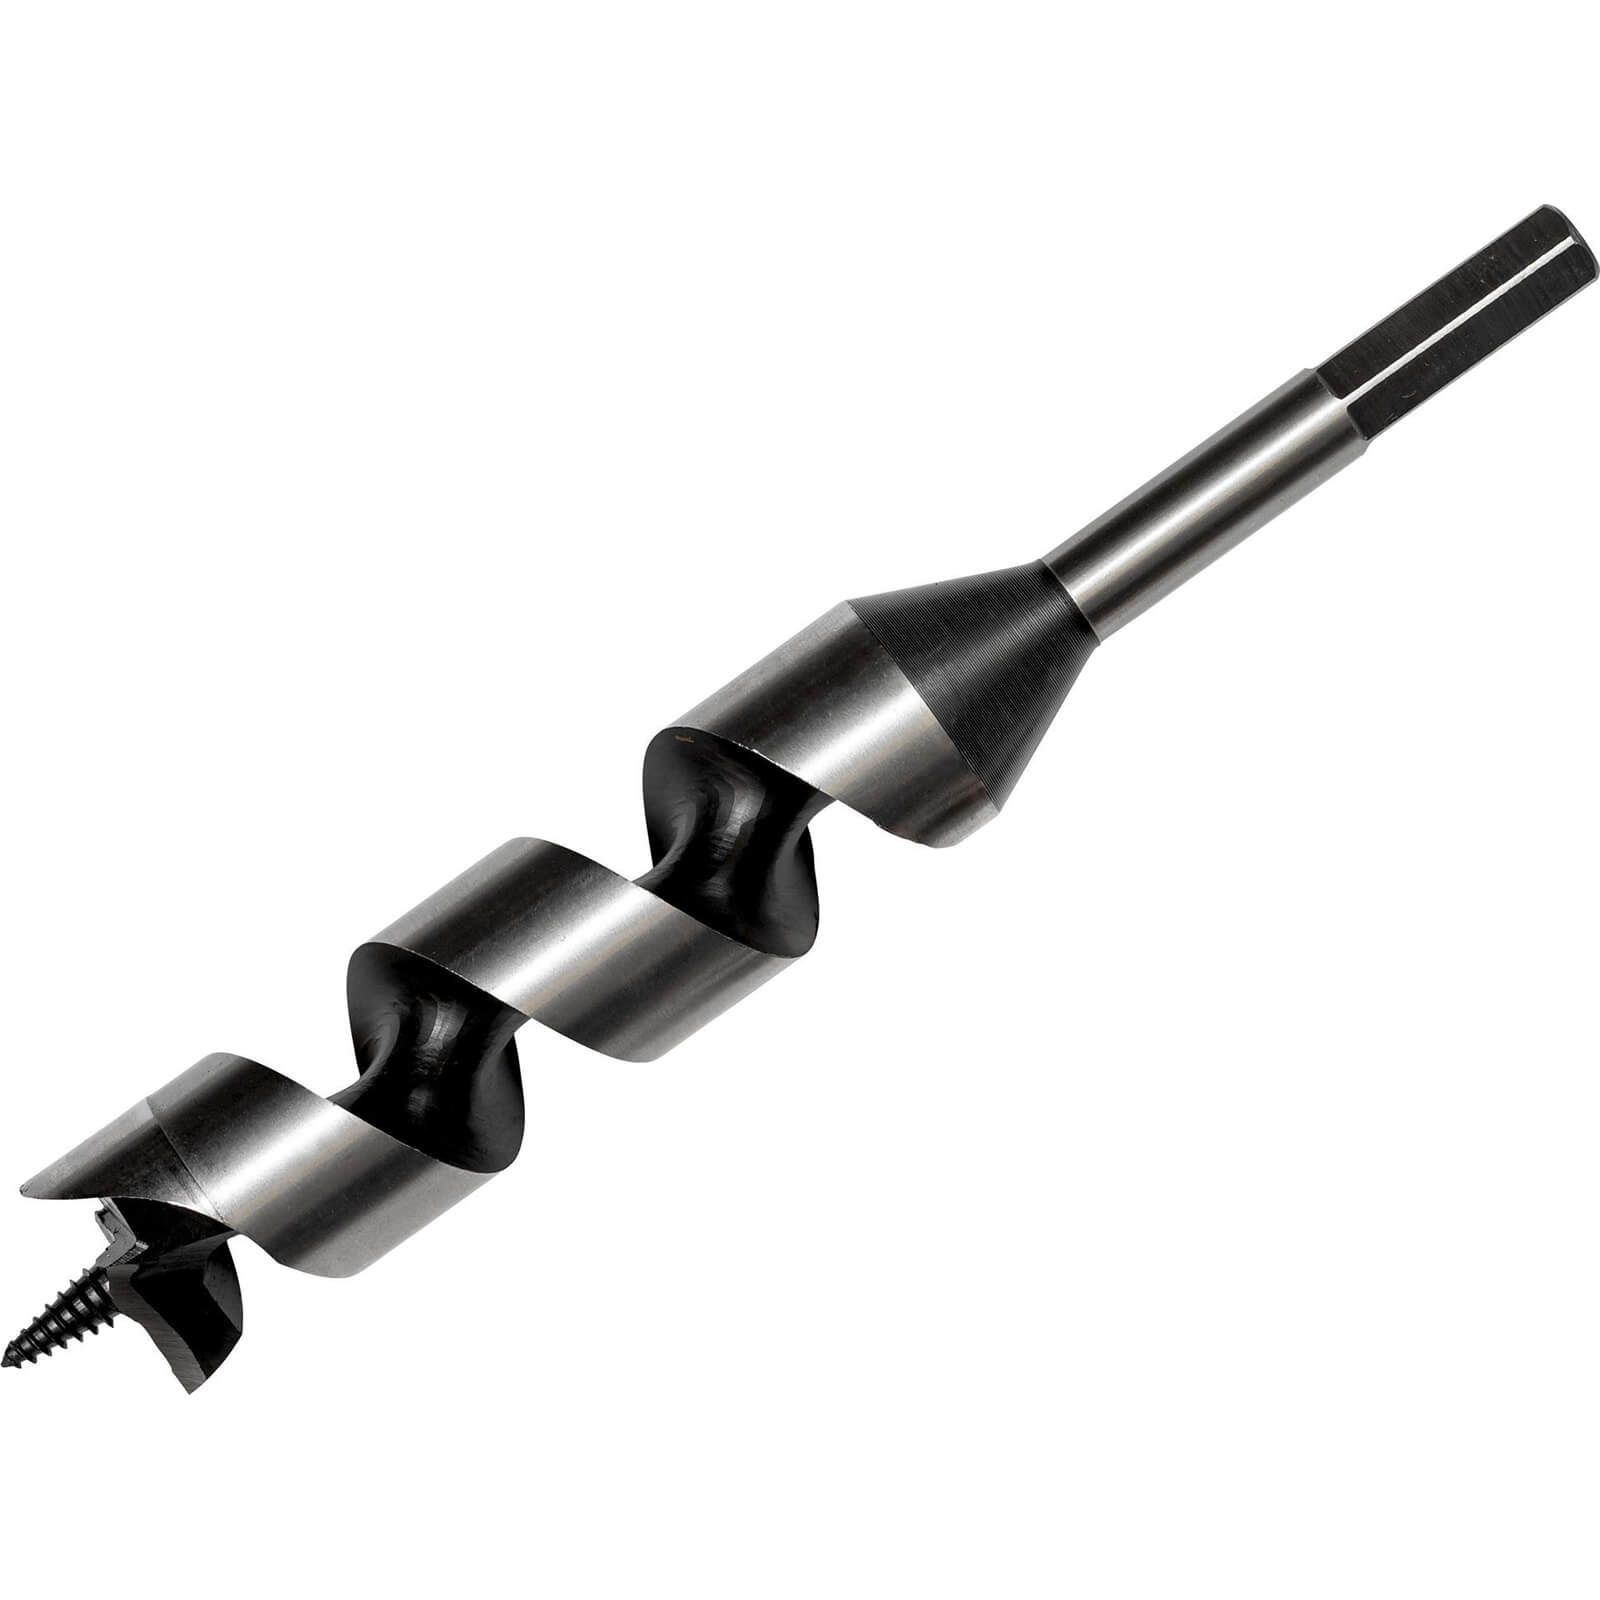 Photo of Bahco 9626 Series Combination Auger Drill Bit 24mm 230mm